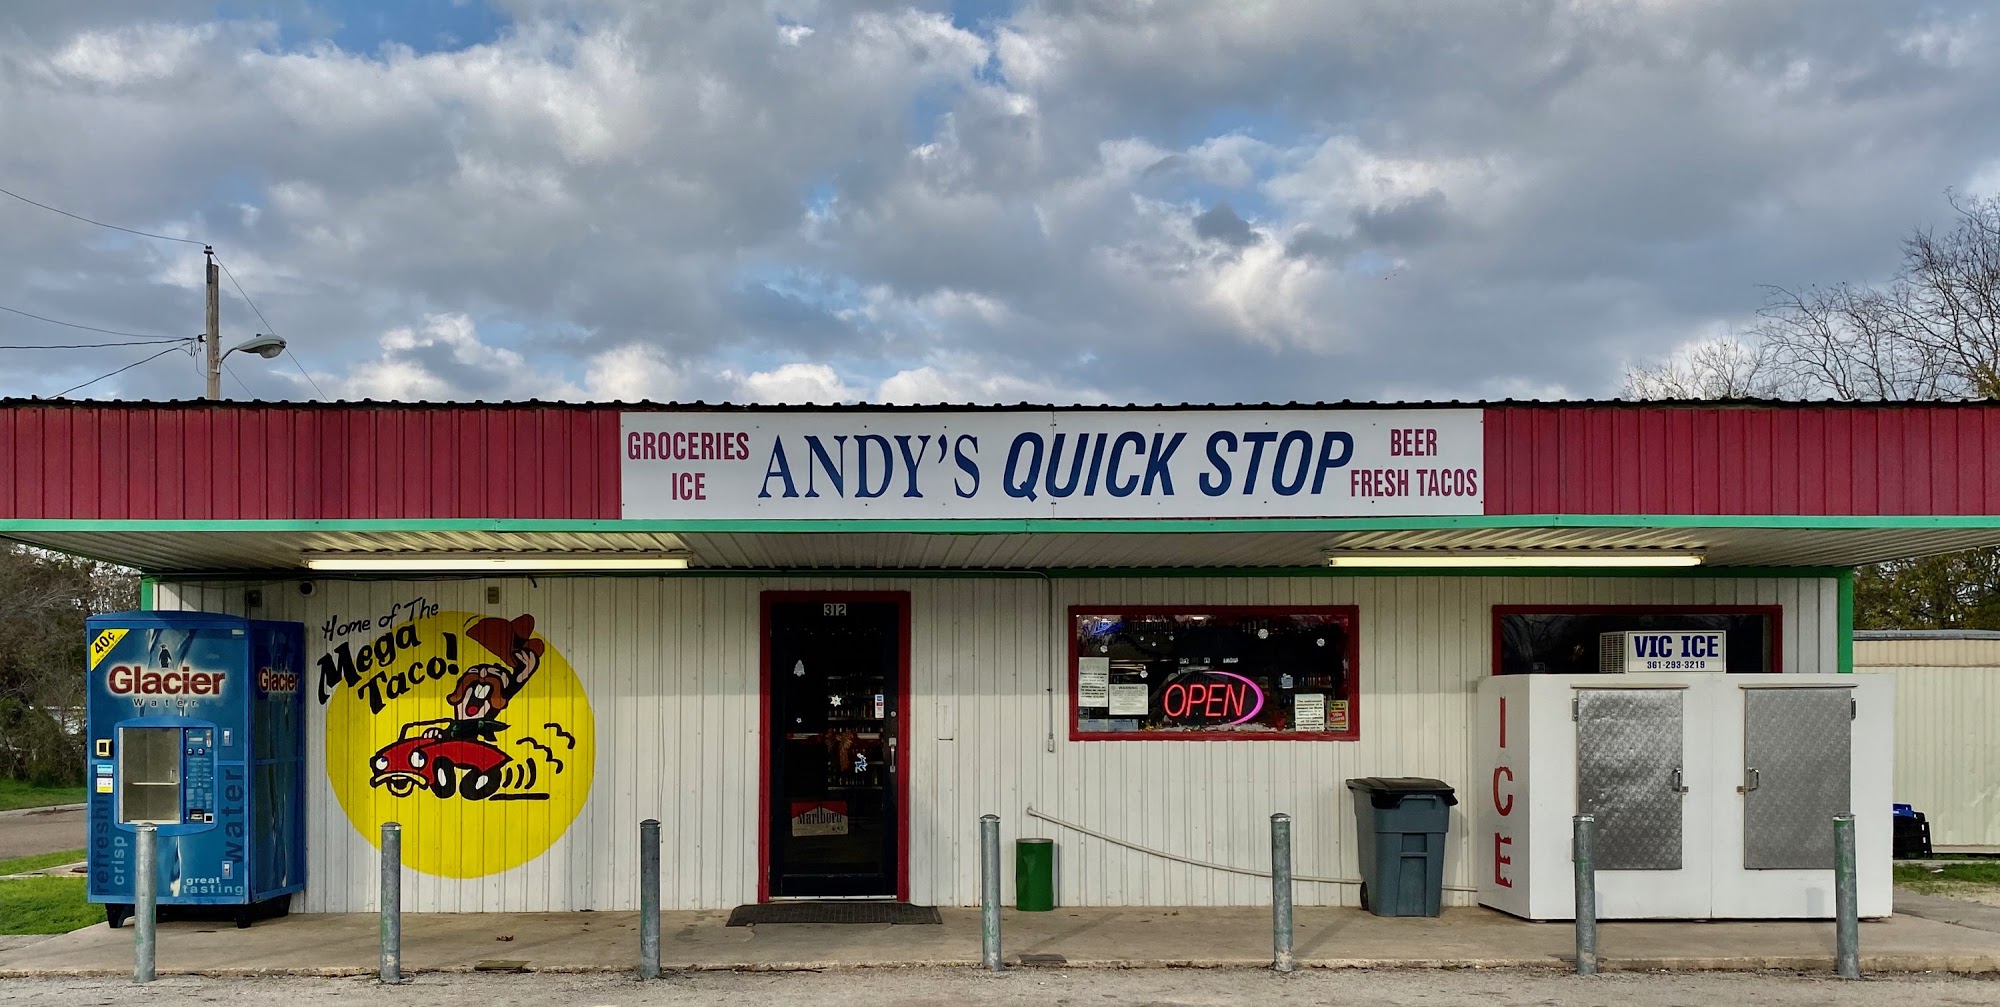 Andy's Quick Stop